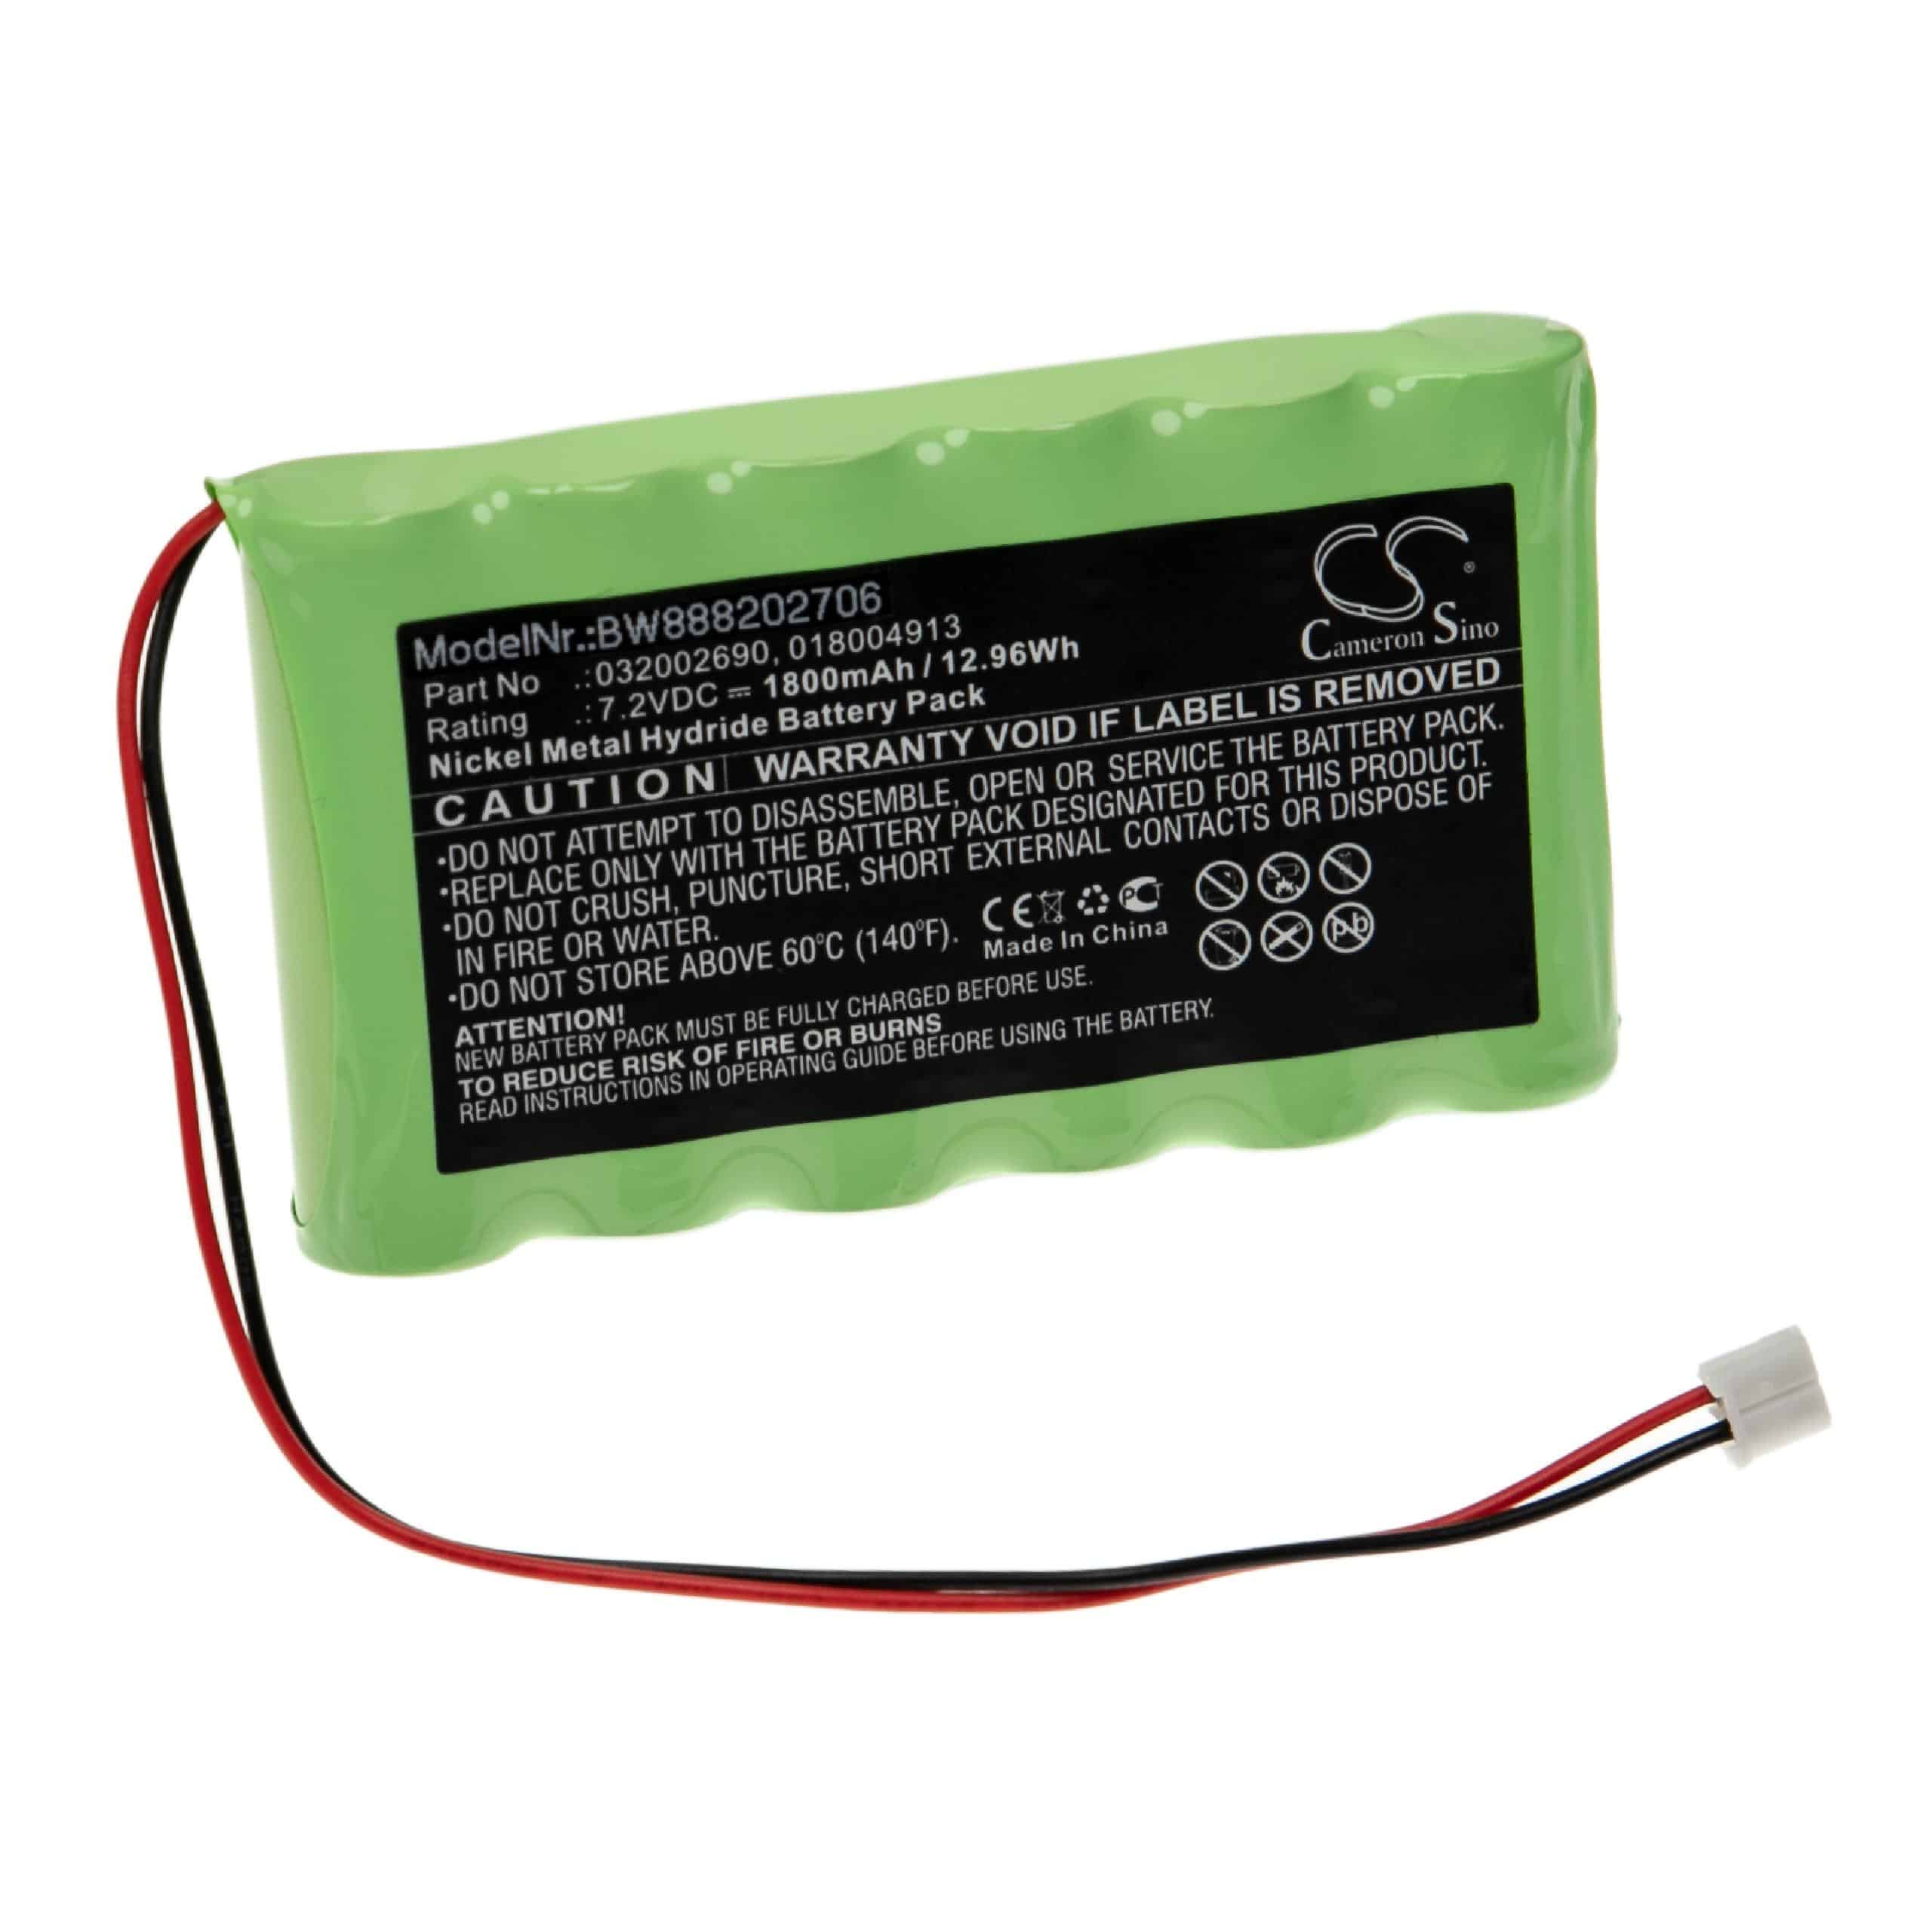 Medical Equipment Battery Replacement for Compex 018004913, 032002690, 018.004.913 - 1800mAh 7.2V NiMH